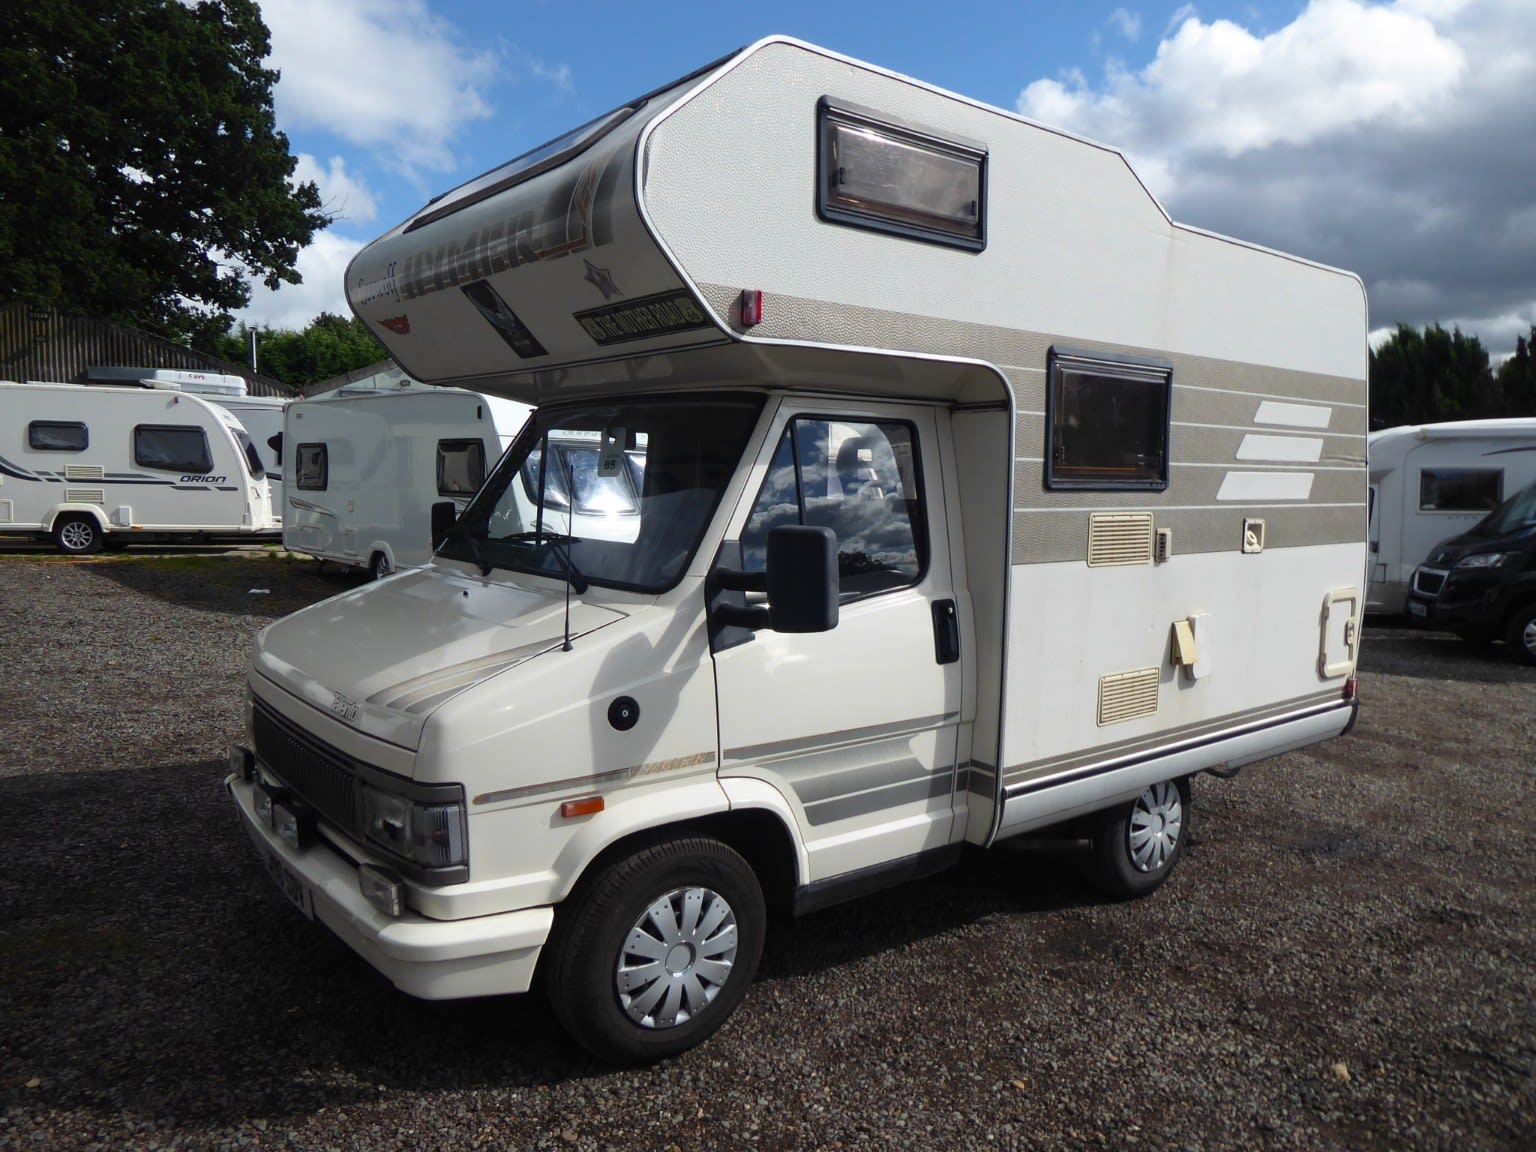 1992 Fiat Ducato Camper, The Fiat Ducato is developed by th…